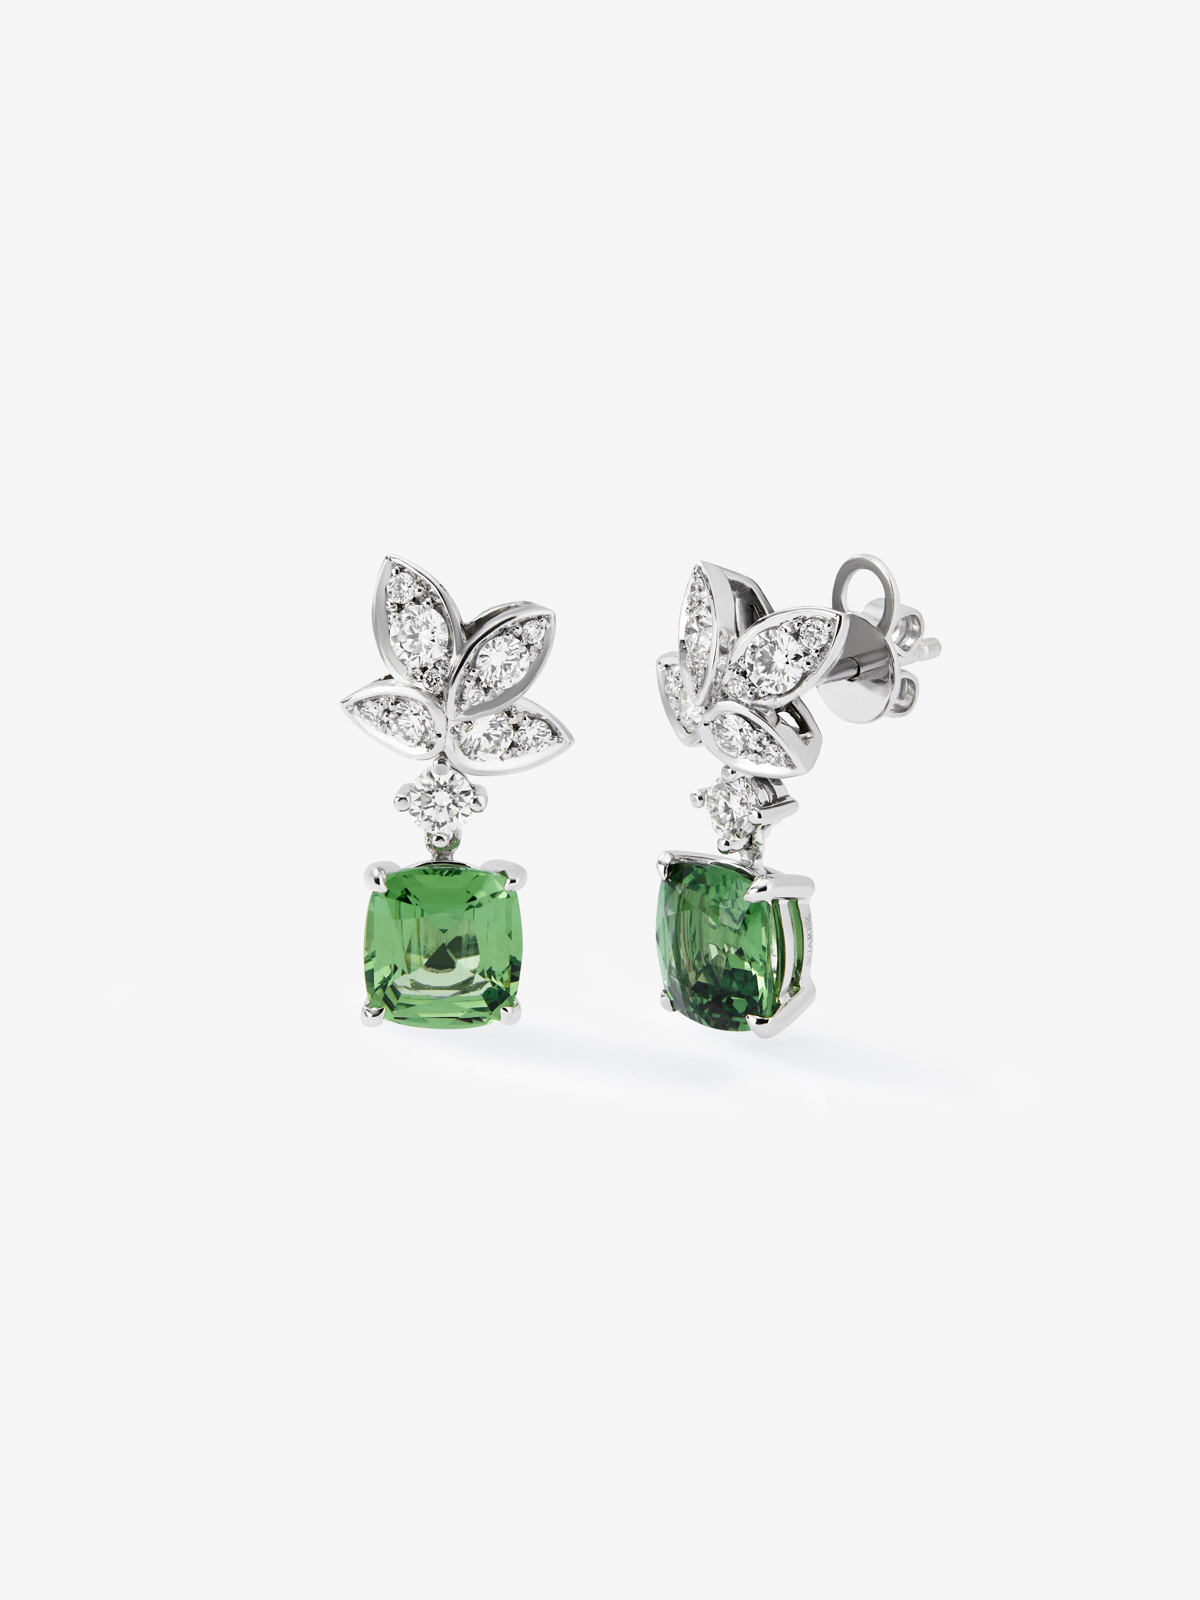 18K White Gold Gold Earrings with Green Tsavors in 4.16 cts and white diamonds in 0.82 cts